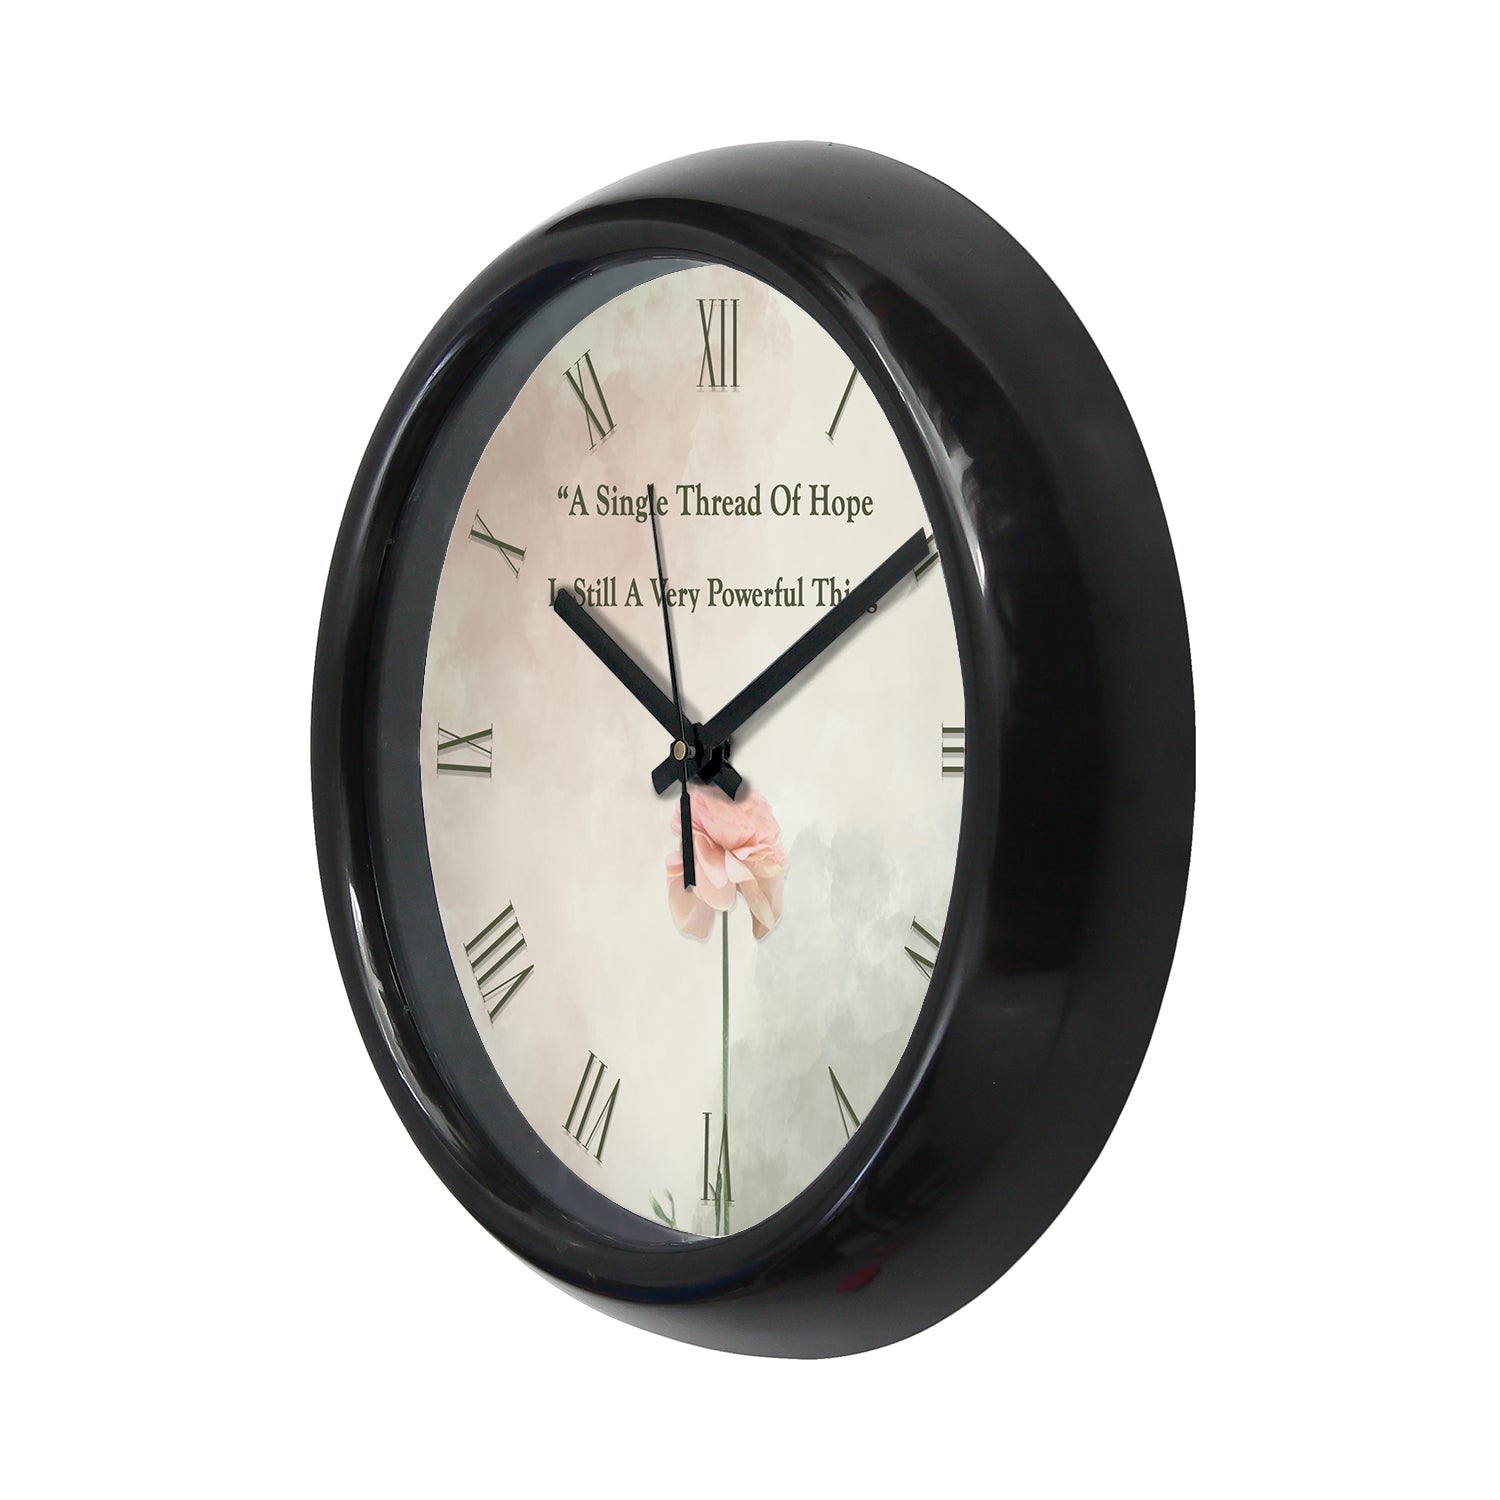 A Single Thread Of Hope Is Still A Very Powerful Thing Motivational Quote Round Shape Designer Wall Clock 4